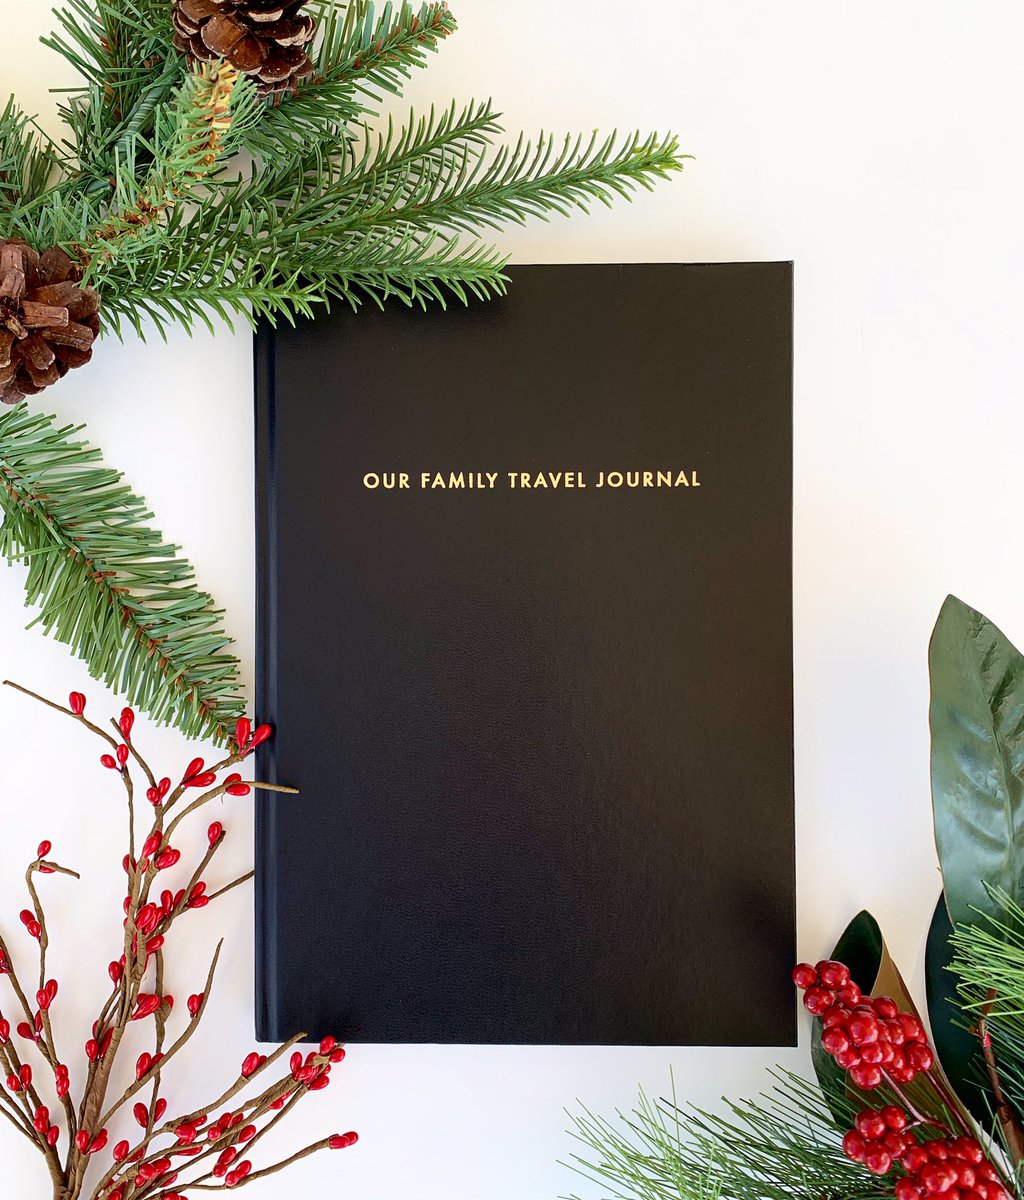 The best gift you can give this year is a gift that means something ❤️

Help someone you love keep their memories alive forever w/ Our Family Travel Journal! 🎁 

#meaningfulgift #giftidea #familytravel